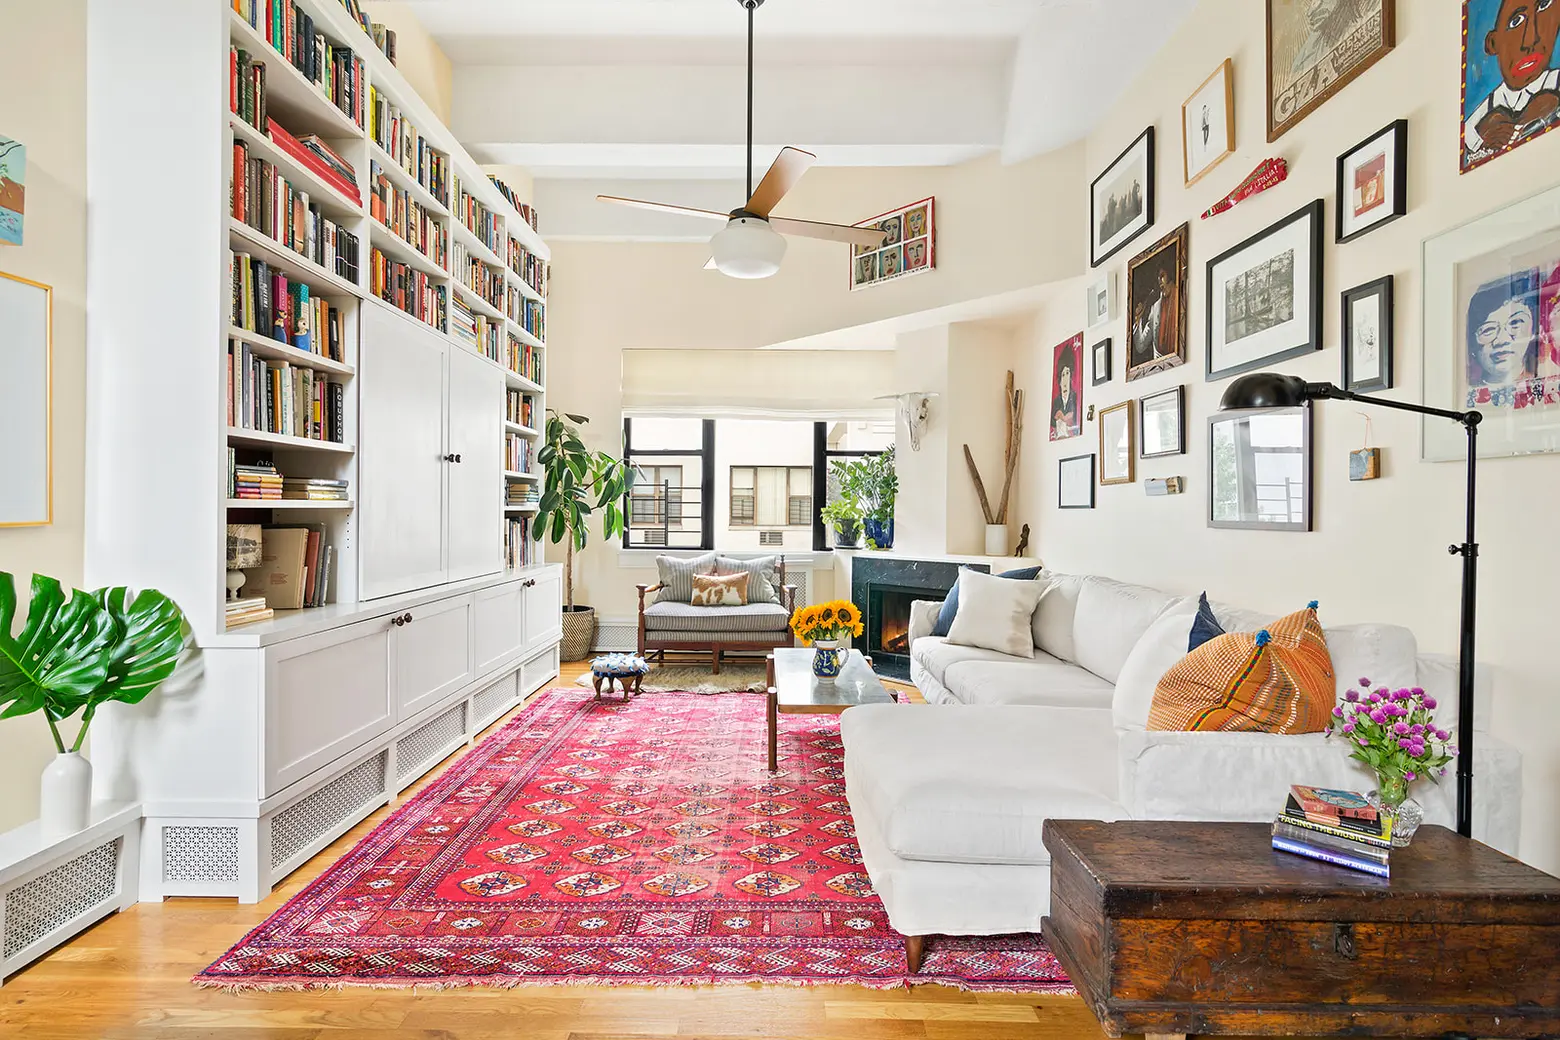 $975K Park Slope co-op feels like a loft with high ceilings and a modern renovation